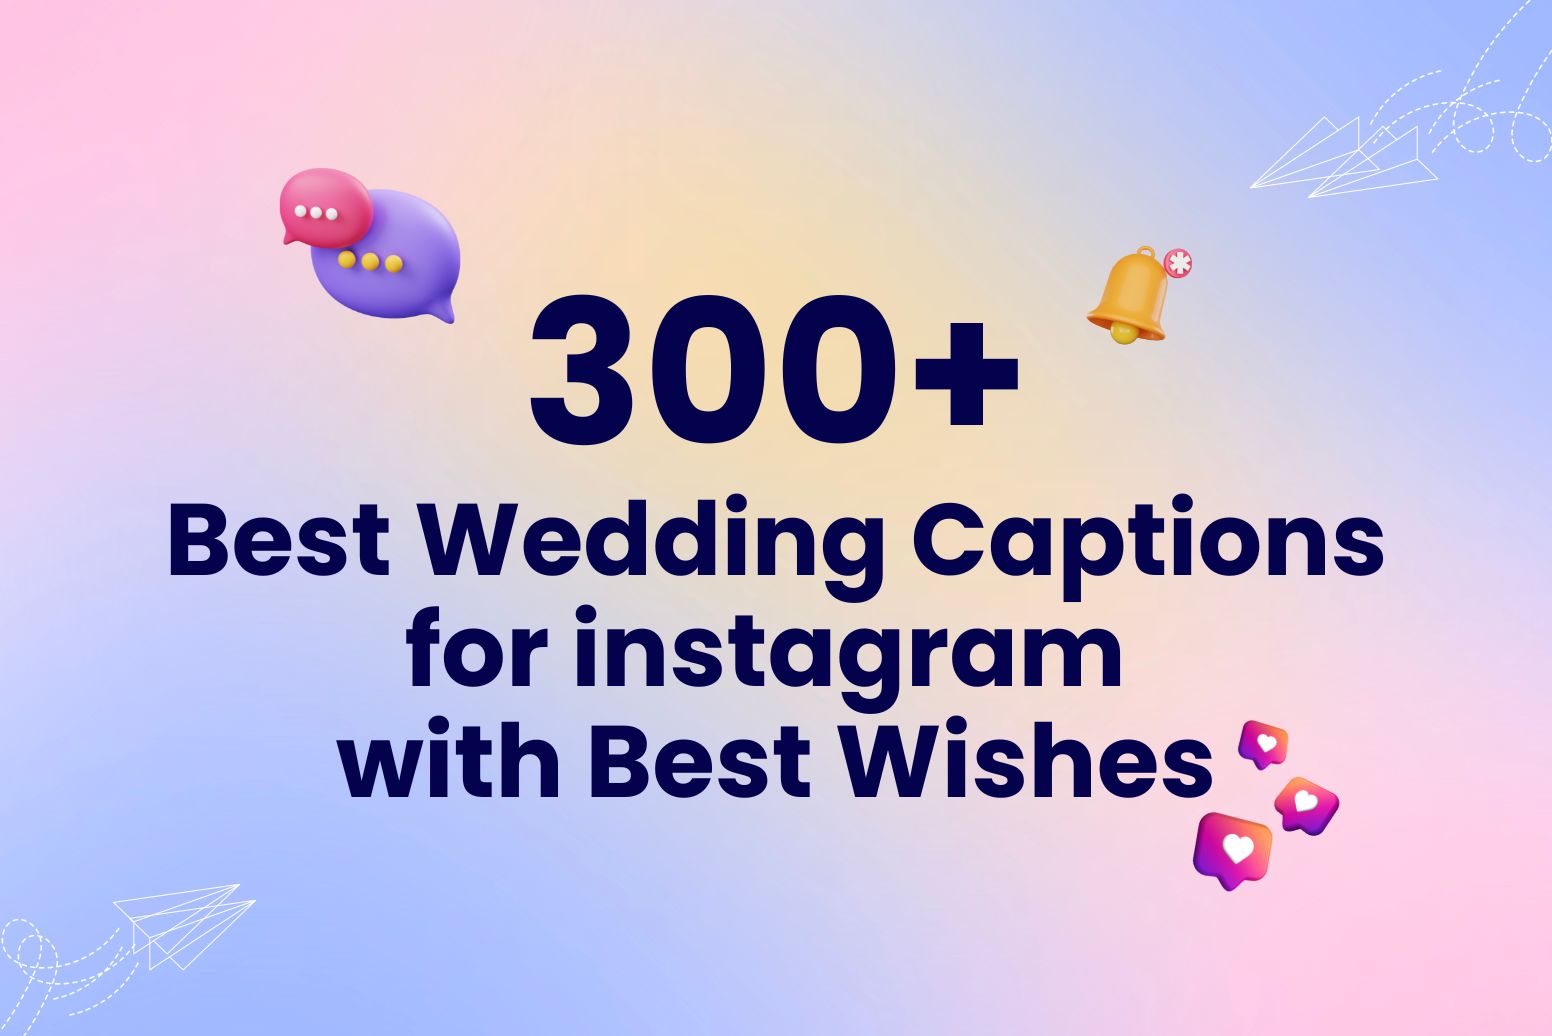 300+ Best Wedding Captions for instagram with Best Wishes